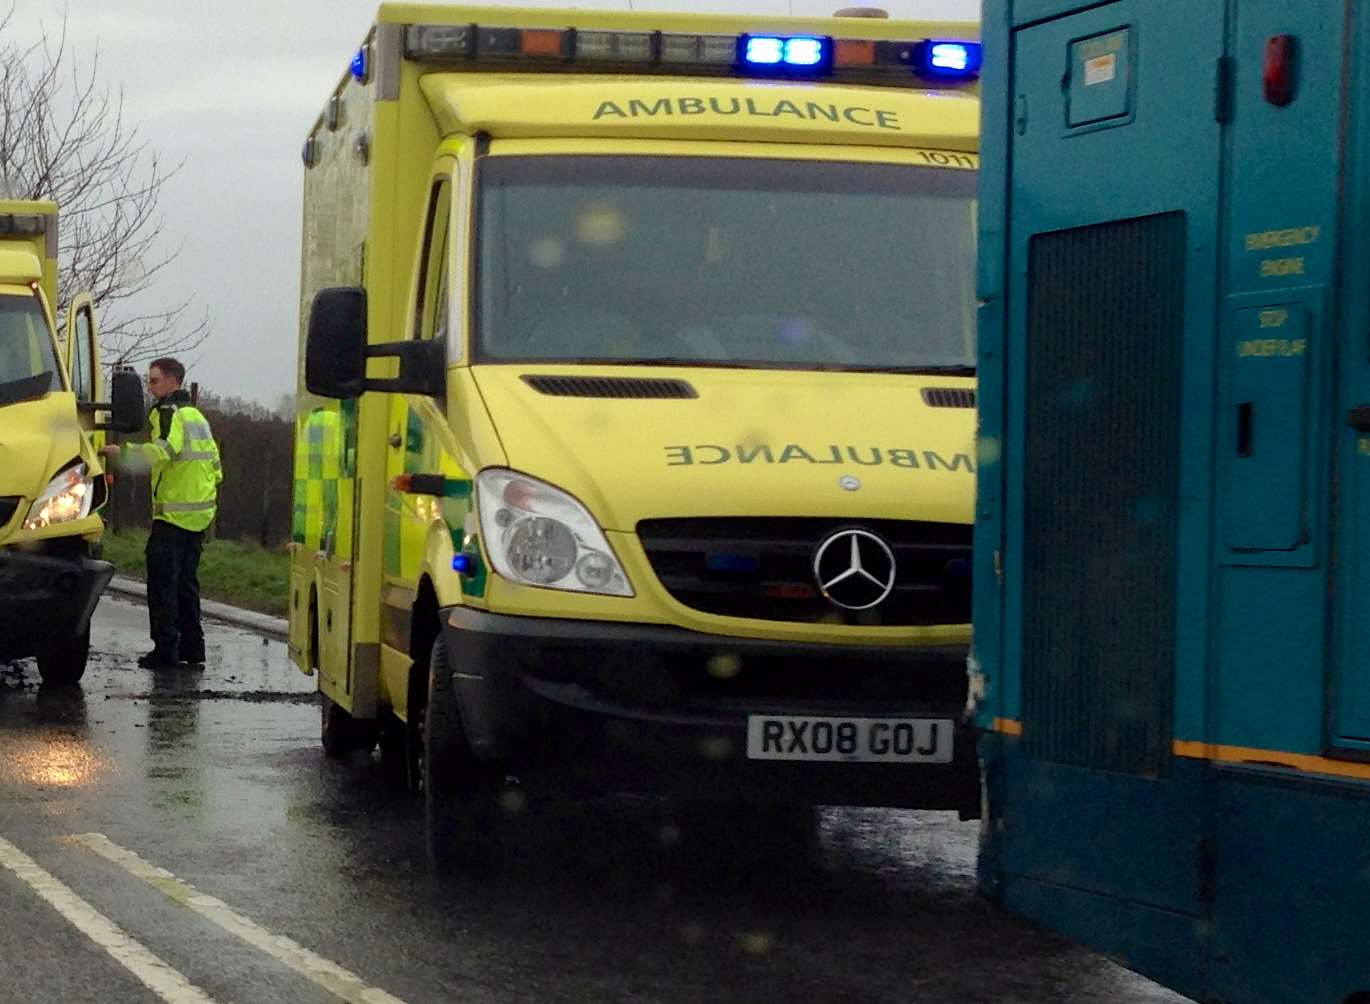 Ambulance crews have been put under "extremely high" pressure